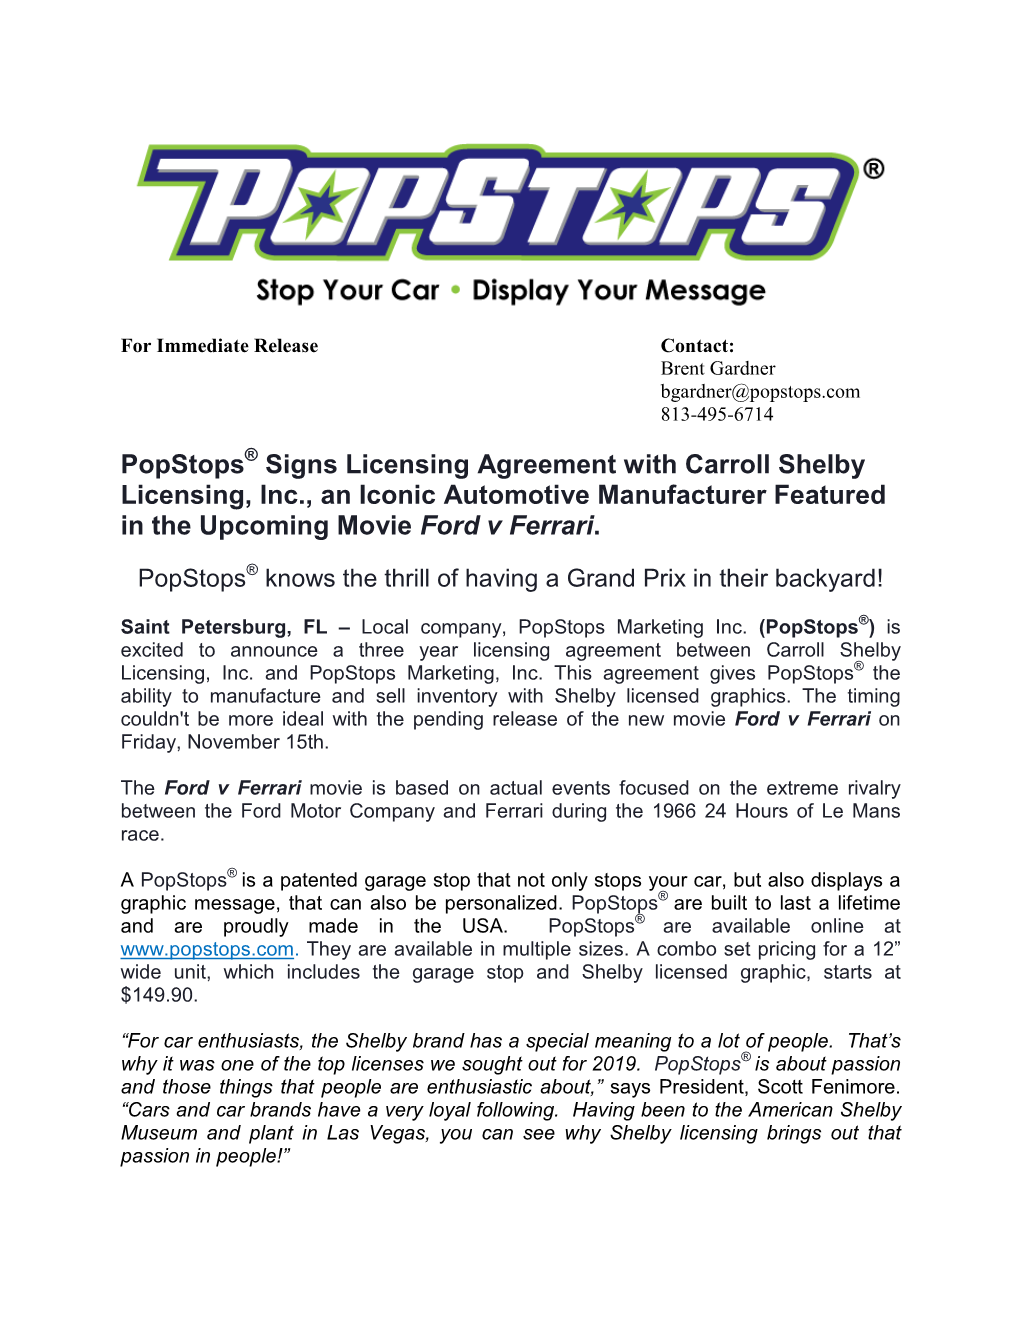 Popstops® Signs Licensing Agreement with Carroll Shelby Licensing, Inc., an Iconic Automotive Manufacturer Featured in the Upcoming Movie Ford V Ferrari